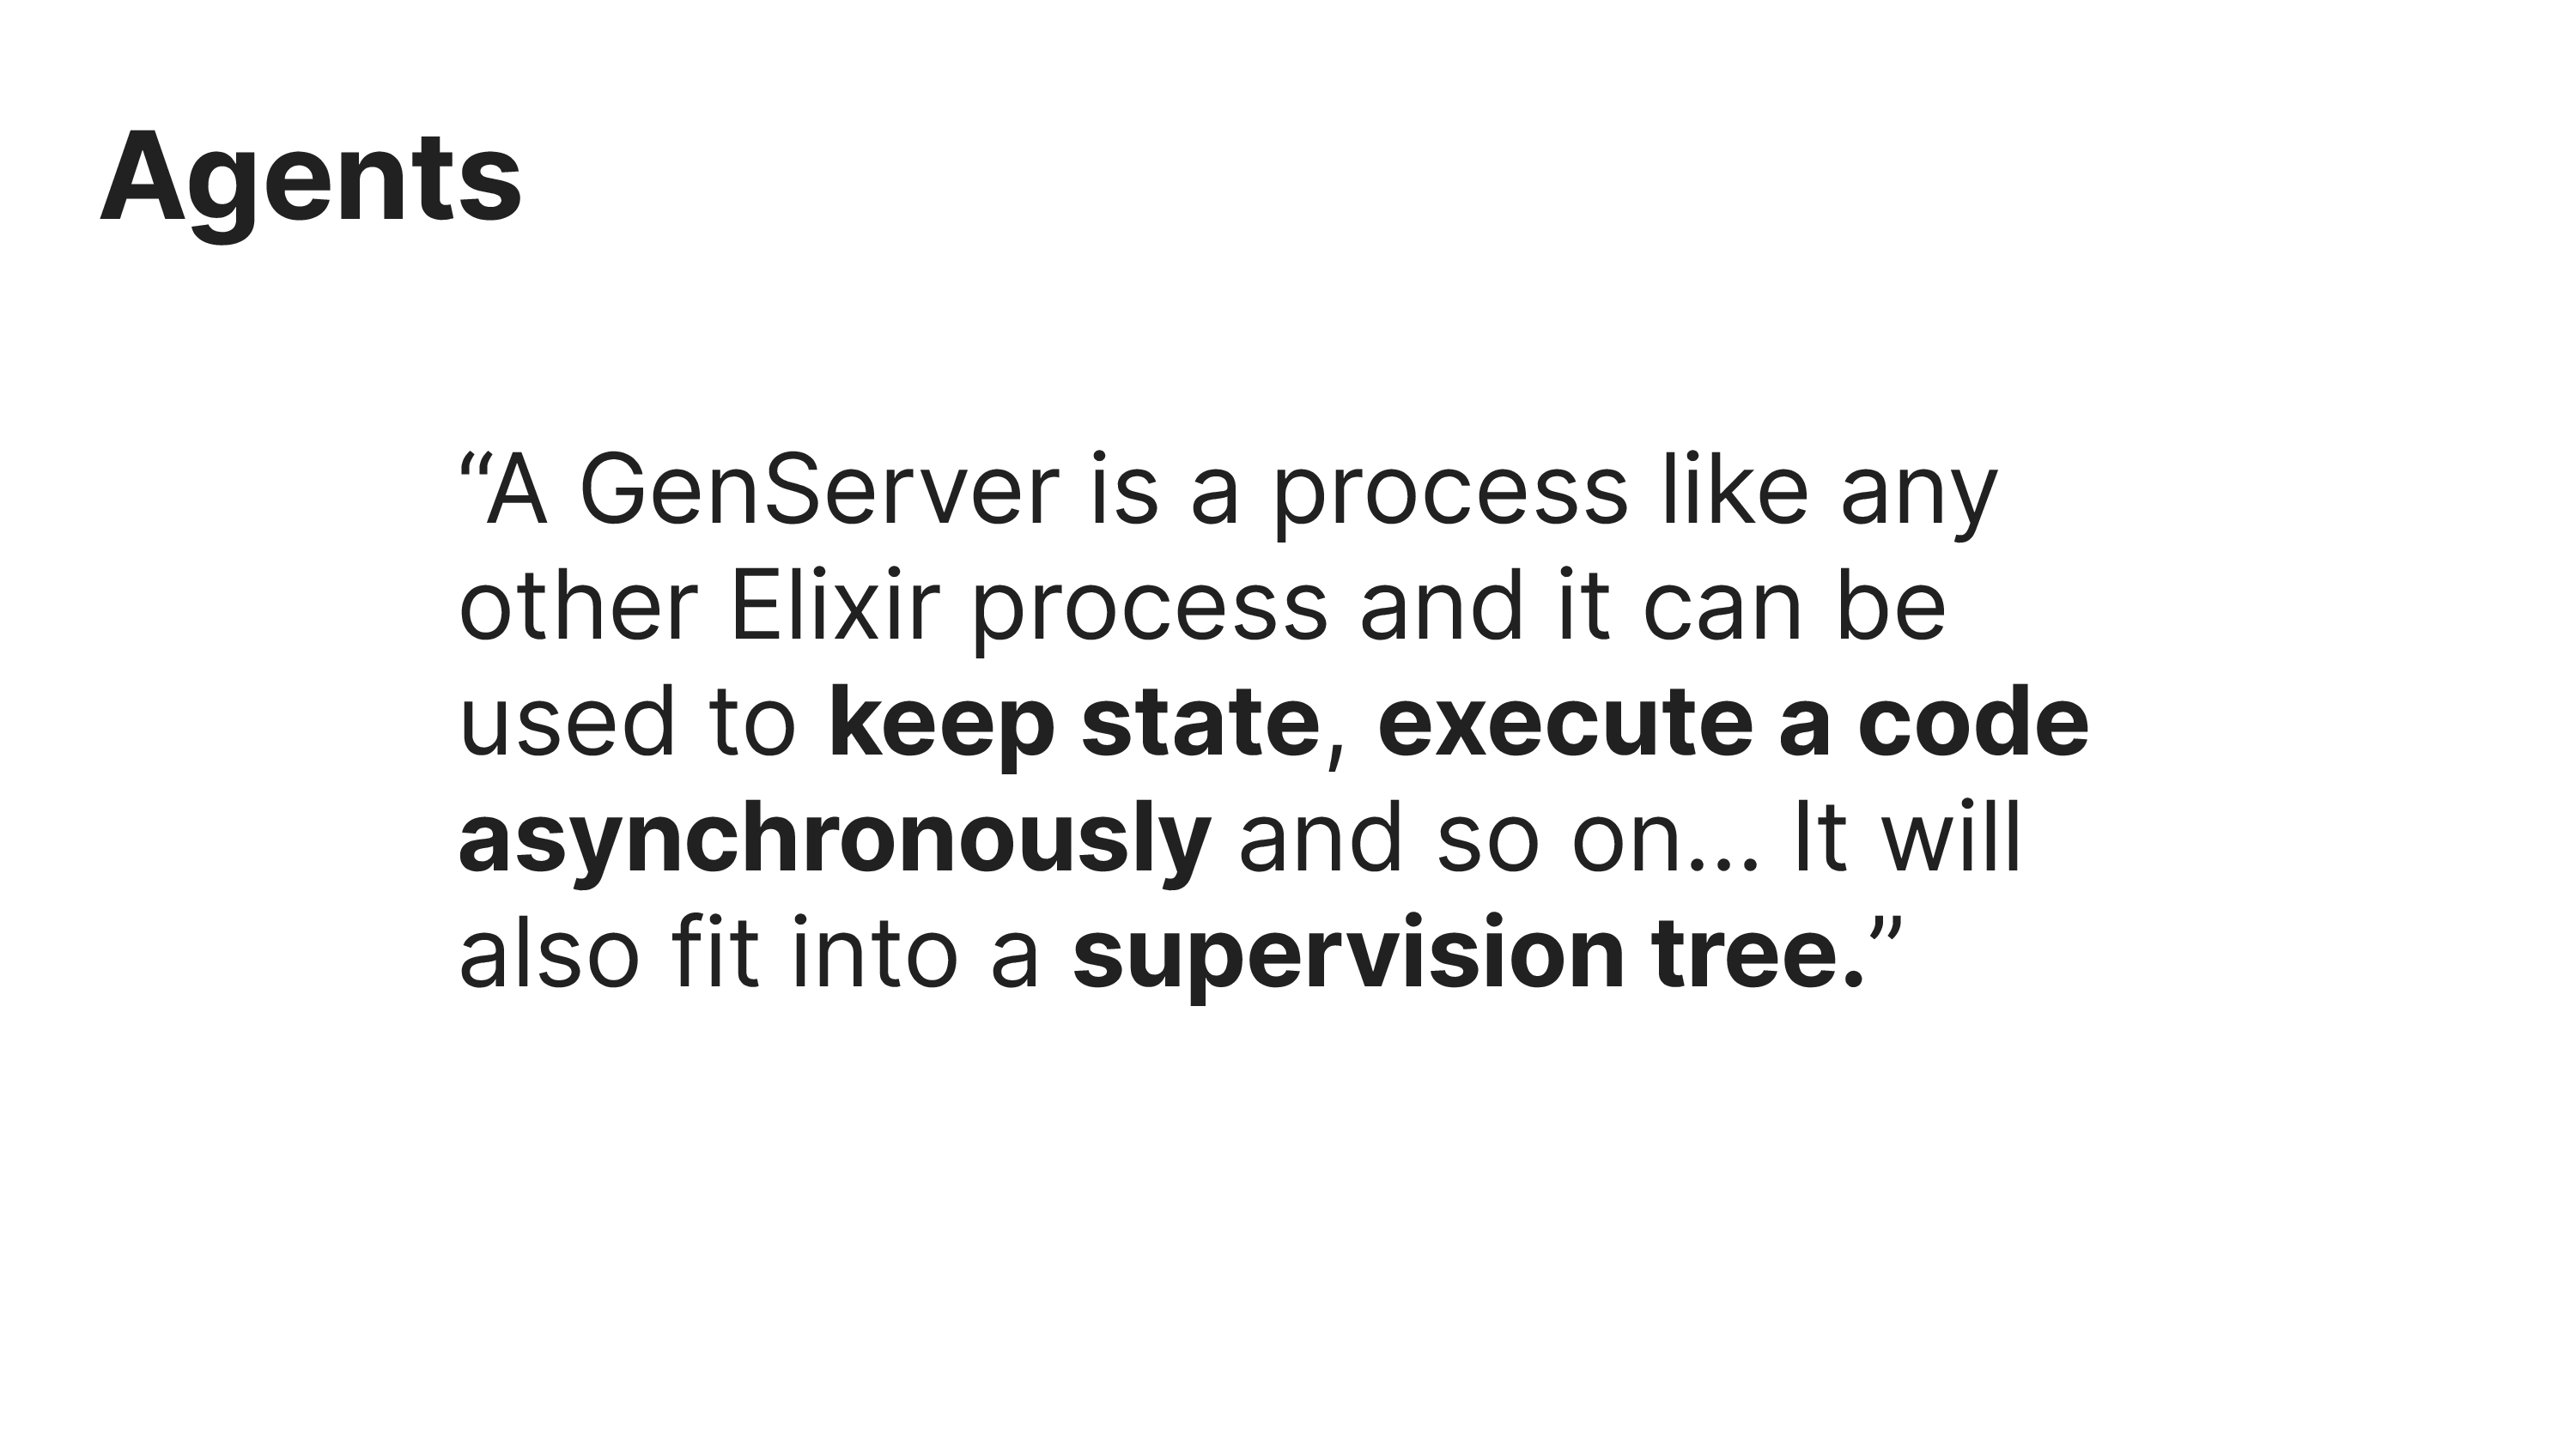 Agents
“A GenServer is a process like any
other Elixir process and it can be
used to keep state, execute a code
asynchronously and so on... It will
also fit into a supervision tree.”
